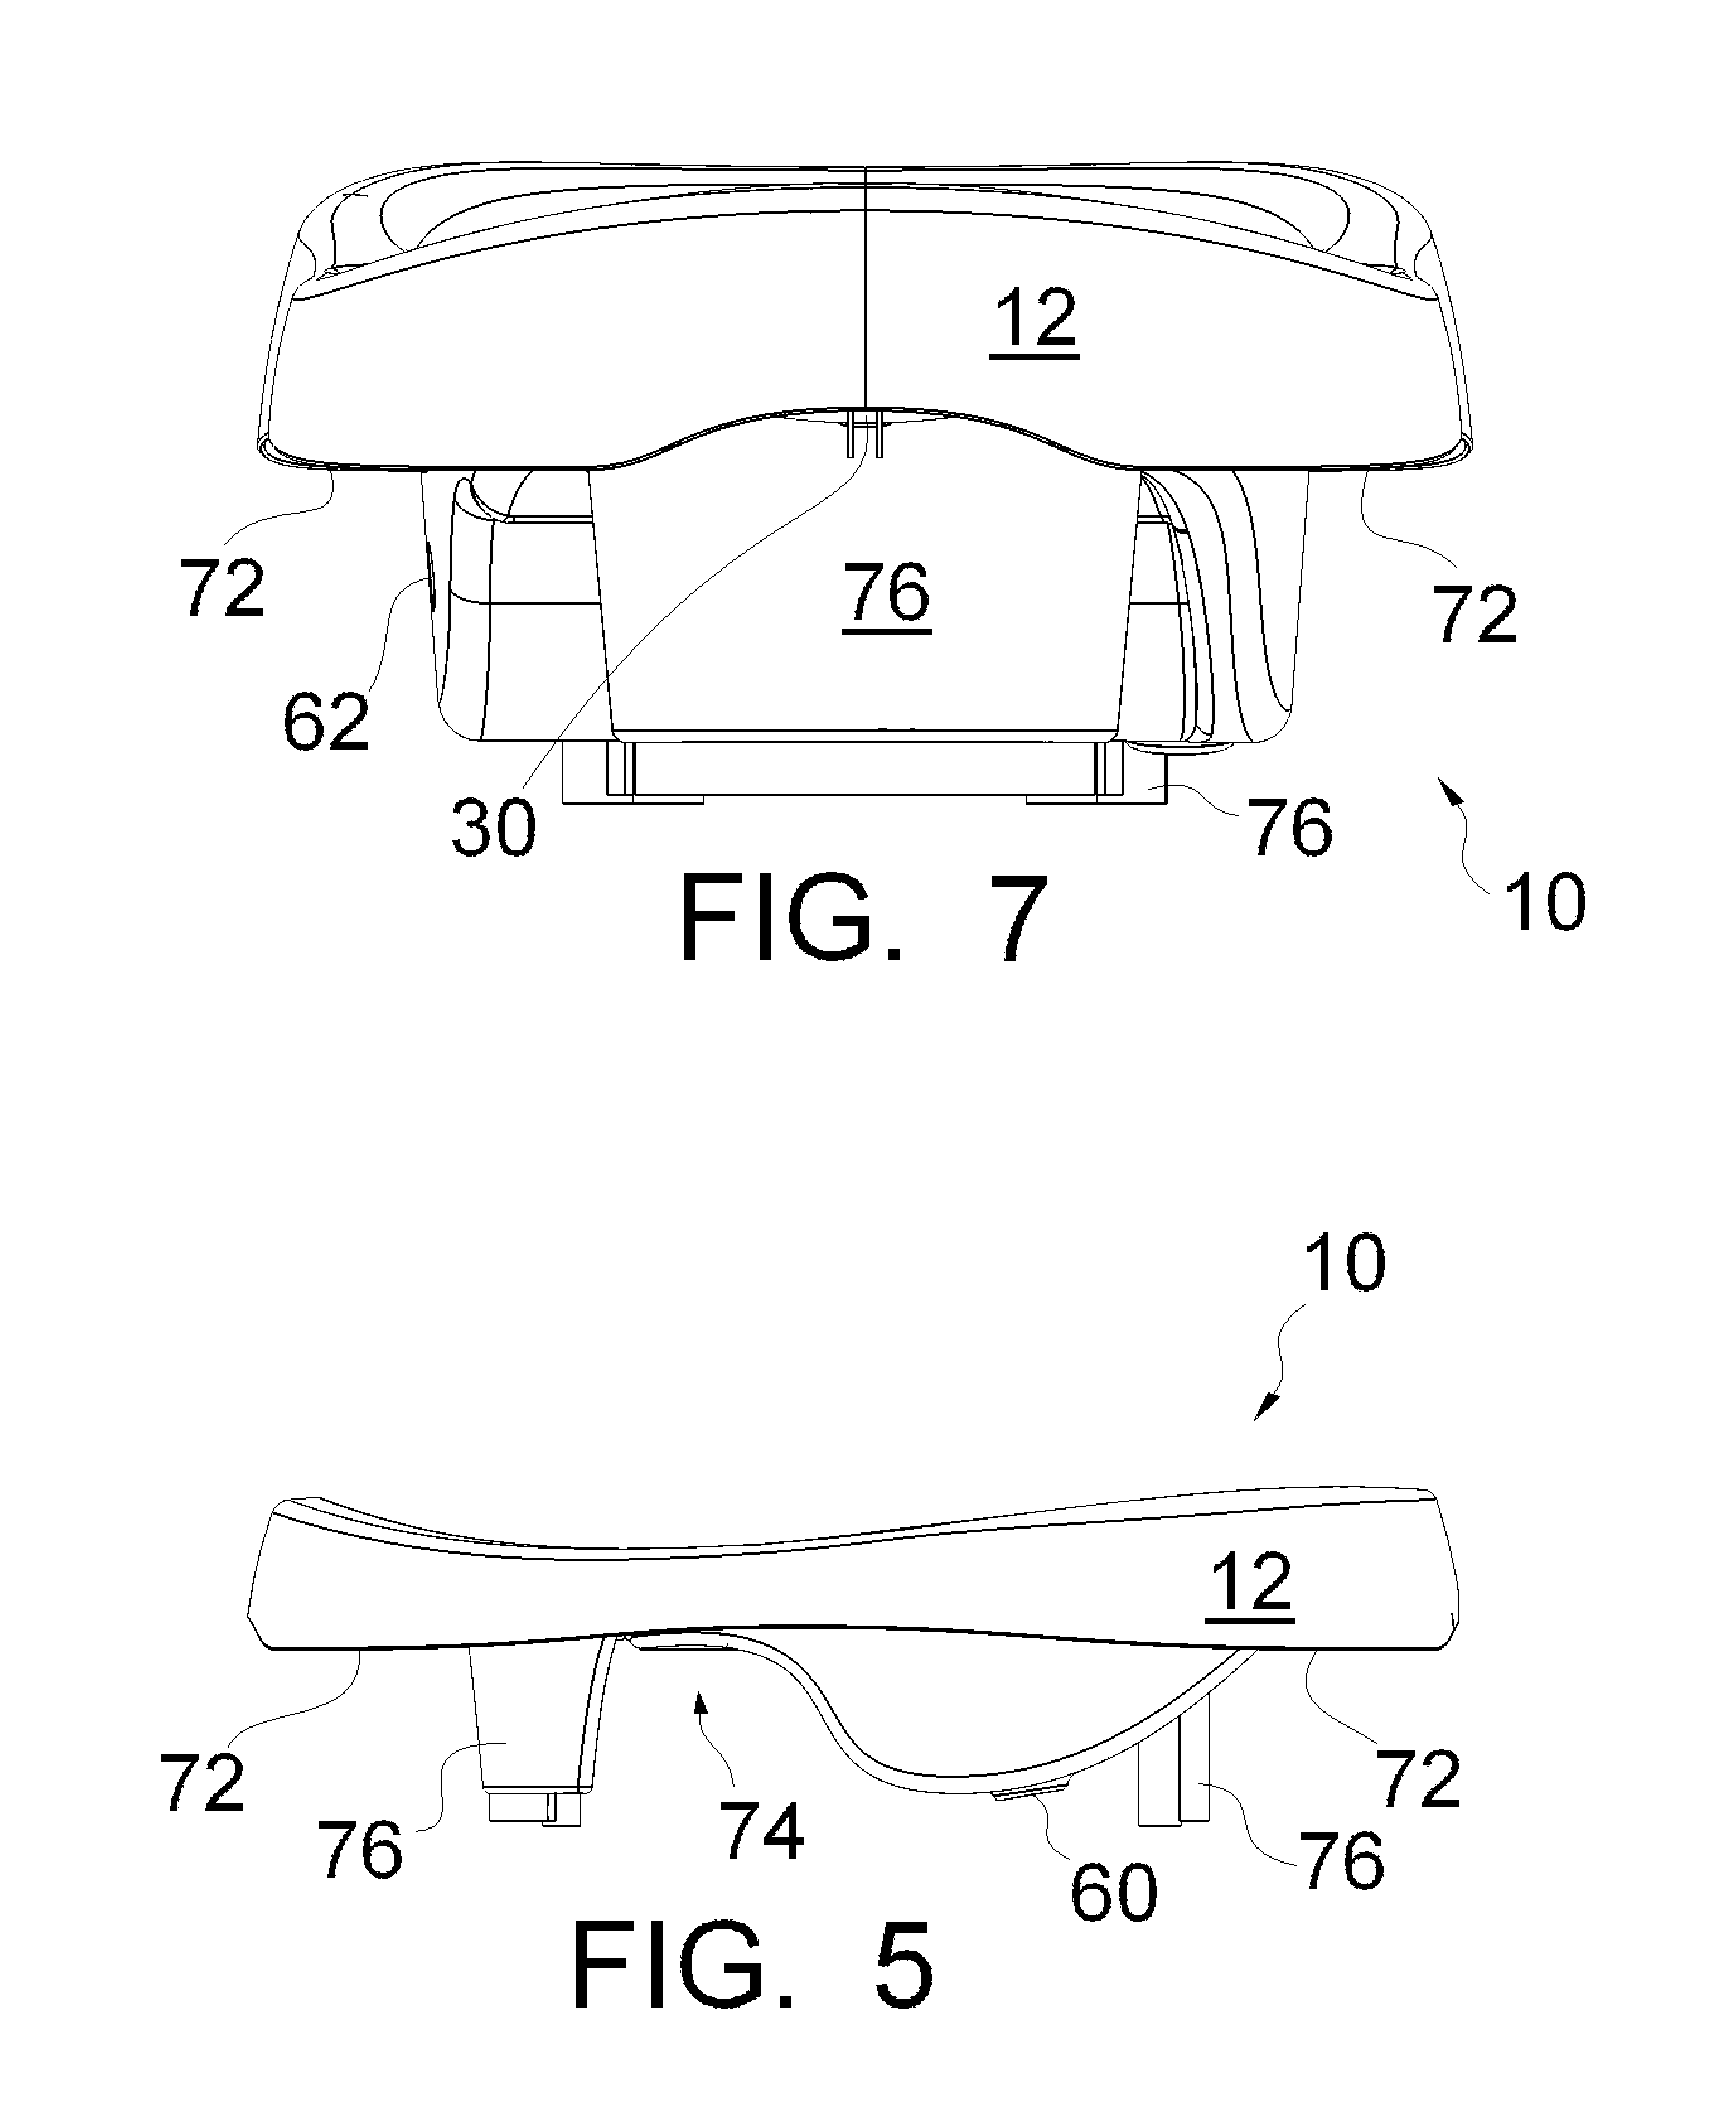 Thermally buffered, circulating clean water flow, universal, temperature indicating baby bathing tub